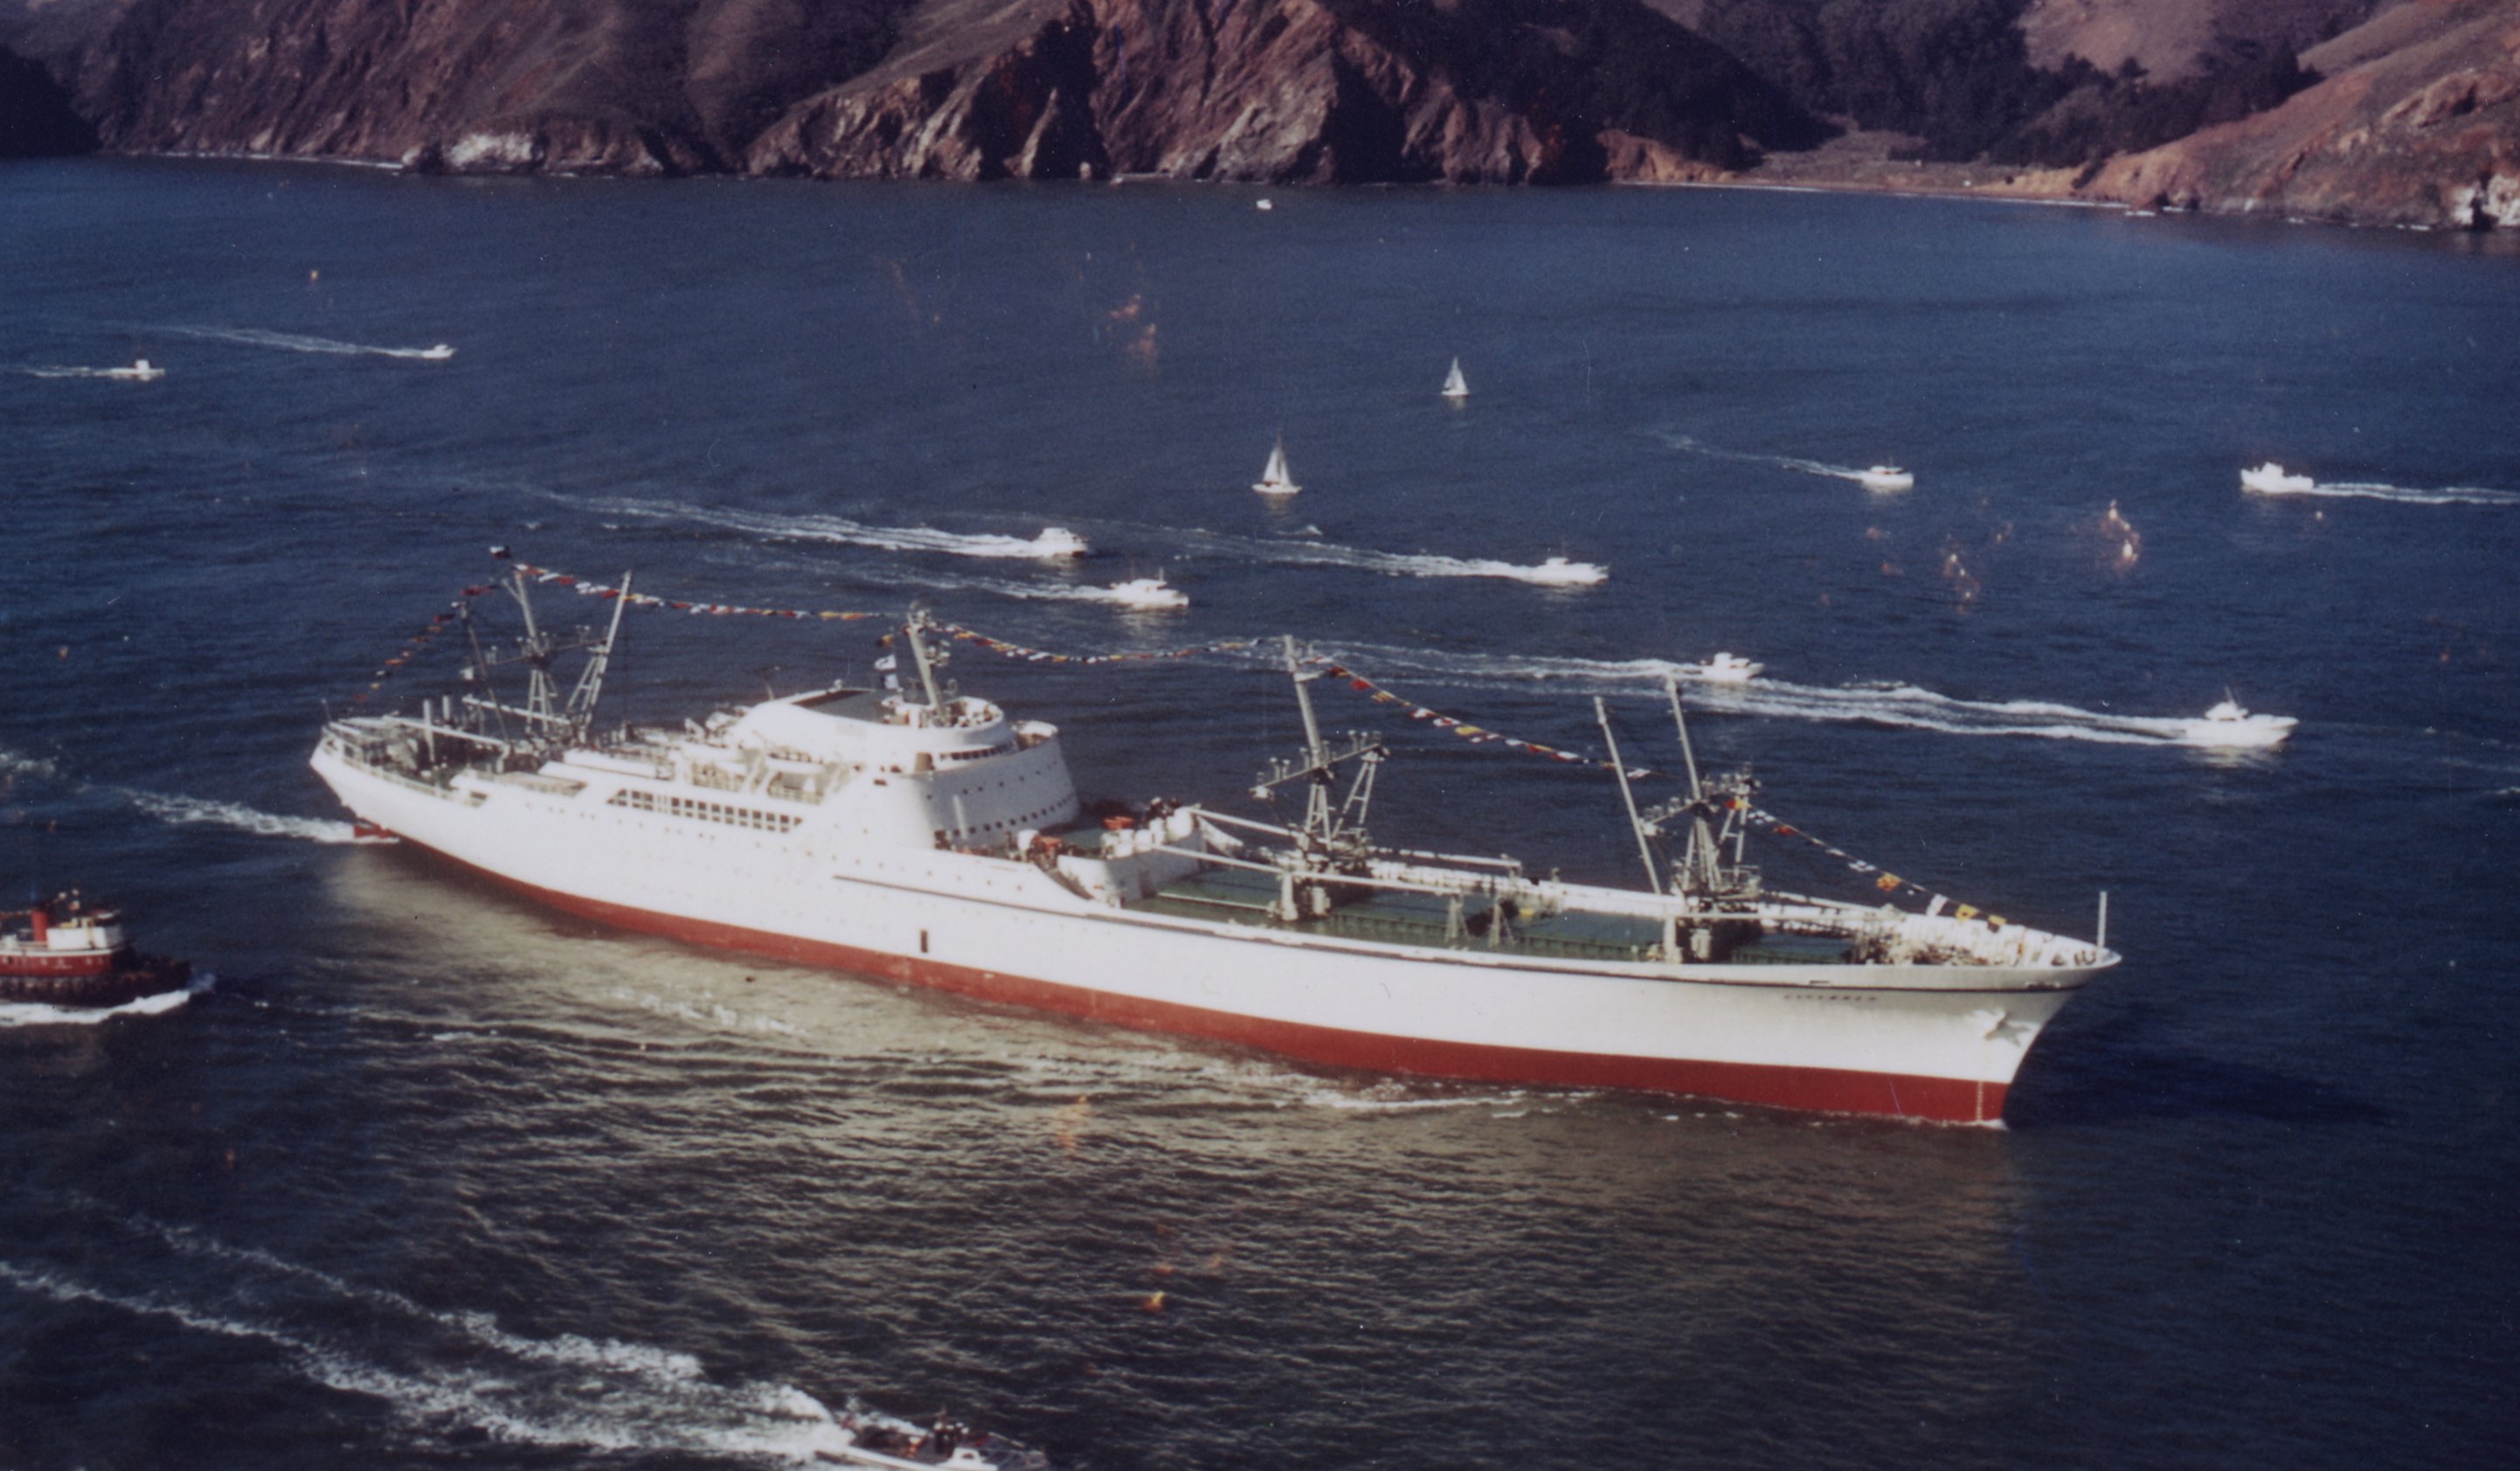 The NS Savannah, the first nuclear powered merchant vessel. It was largely experimental and suffered design issues unrelated to its engine. Source: US Government NARA (Public domain), via Wikimedia Commons.